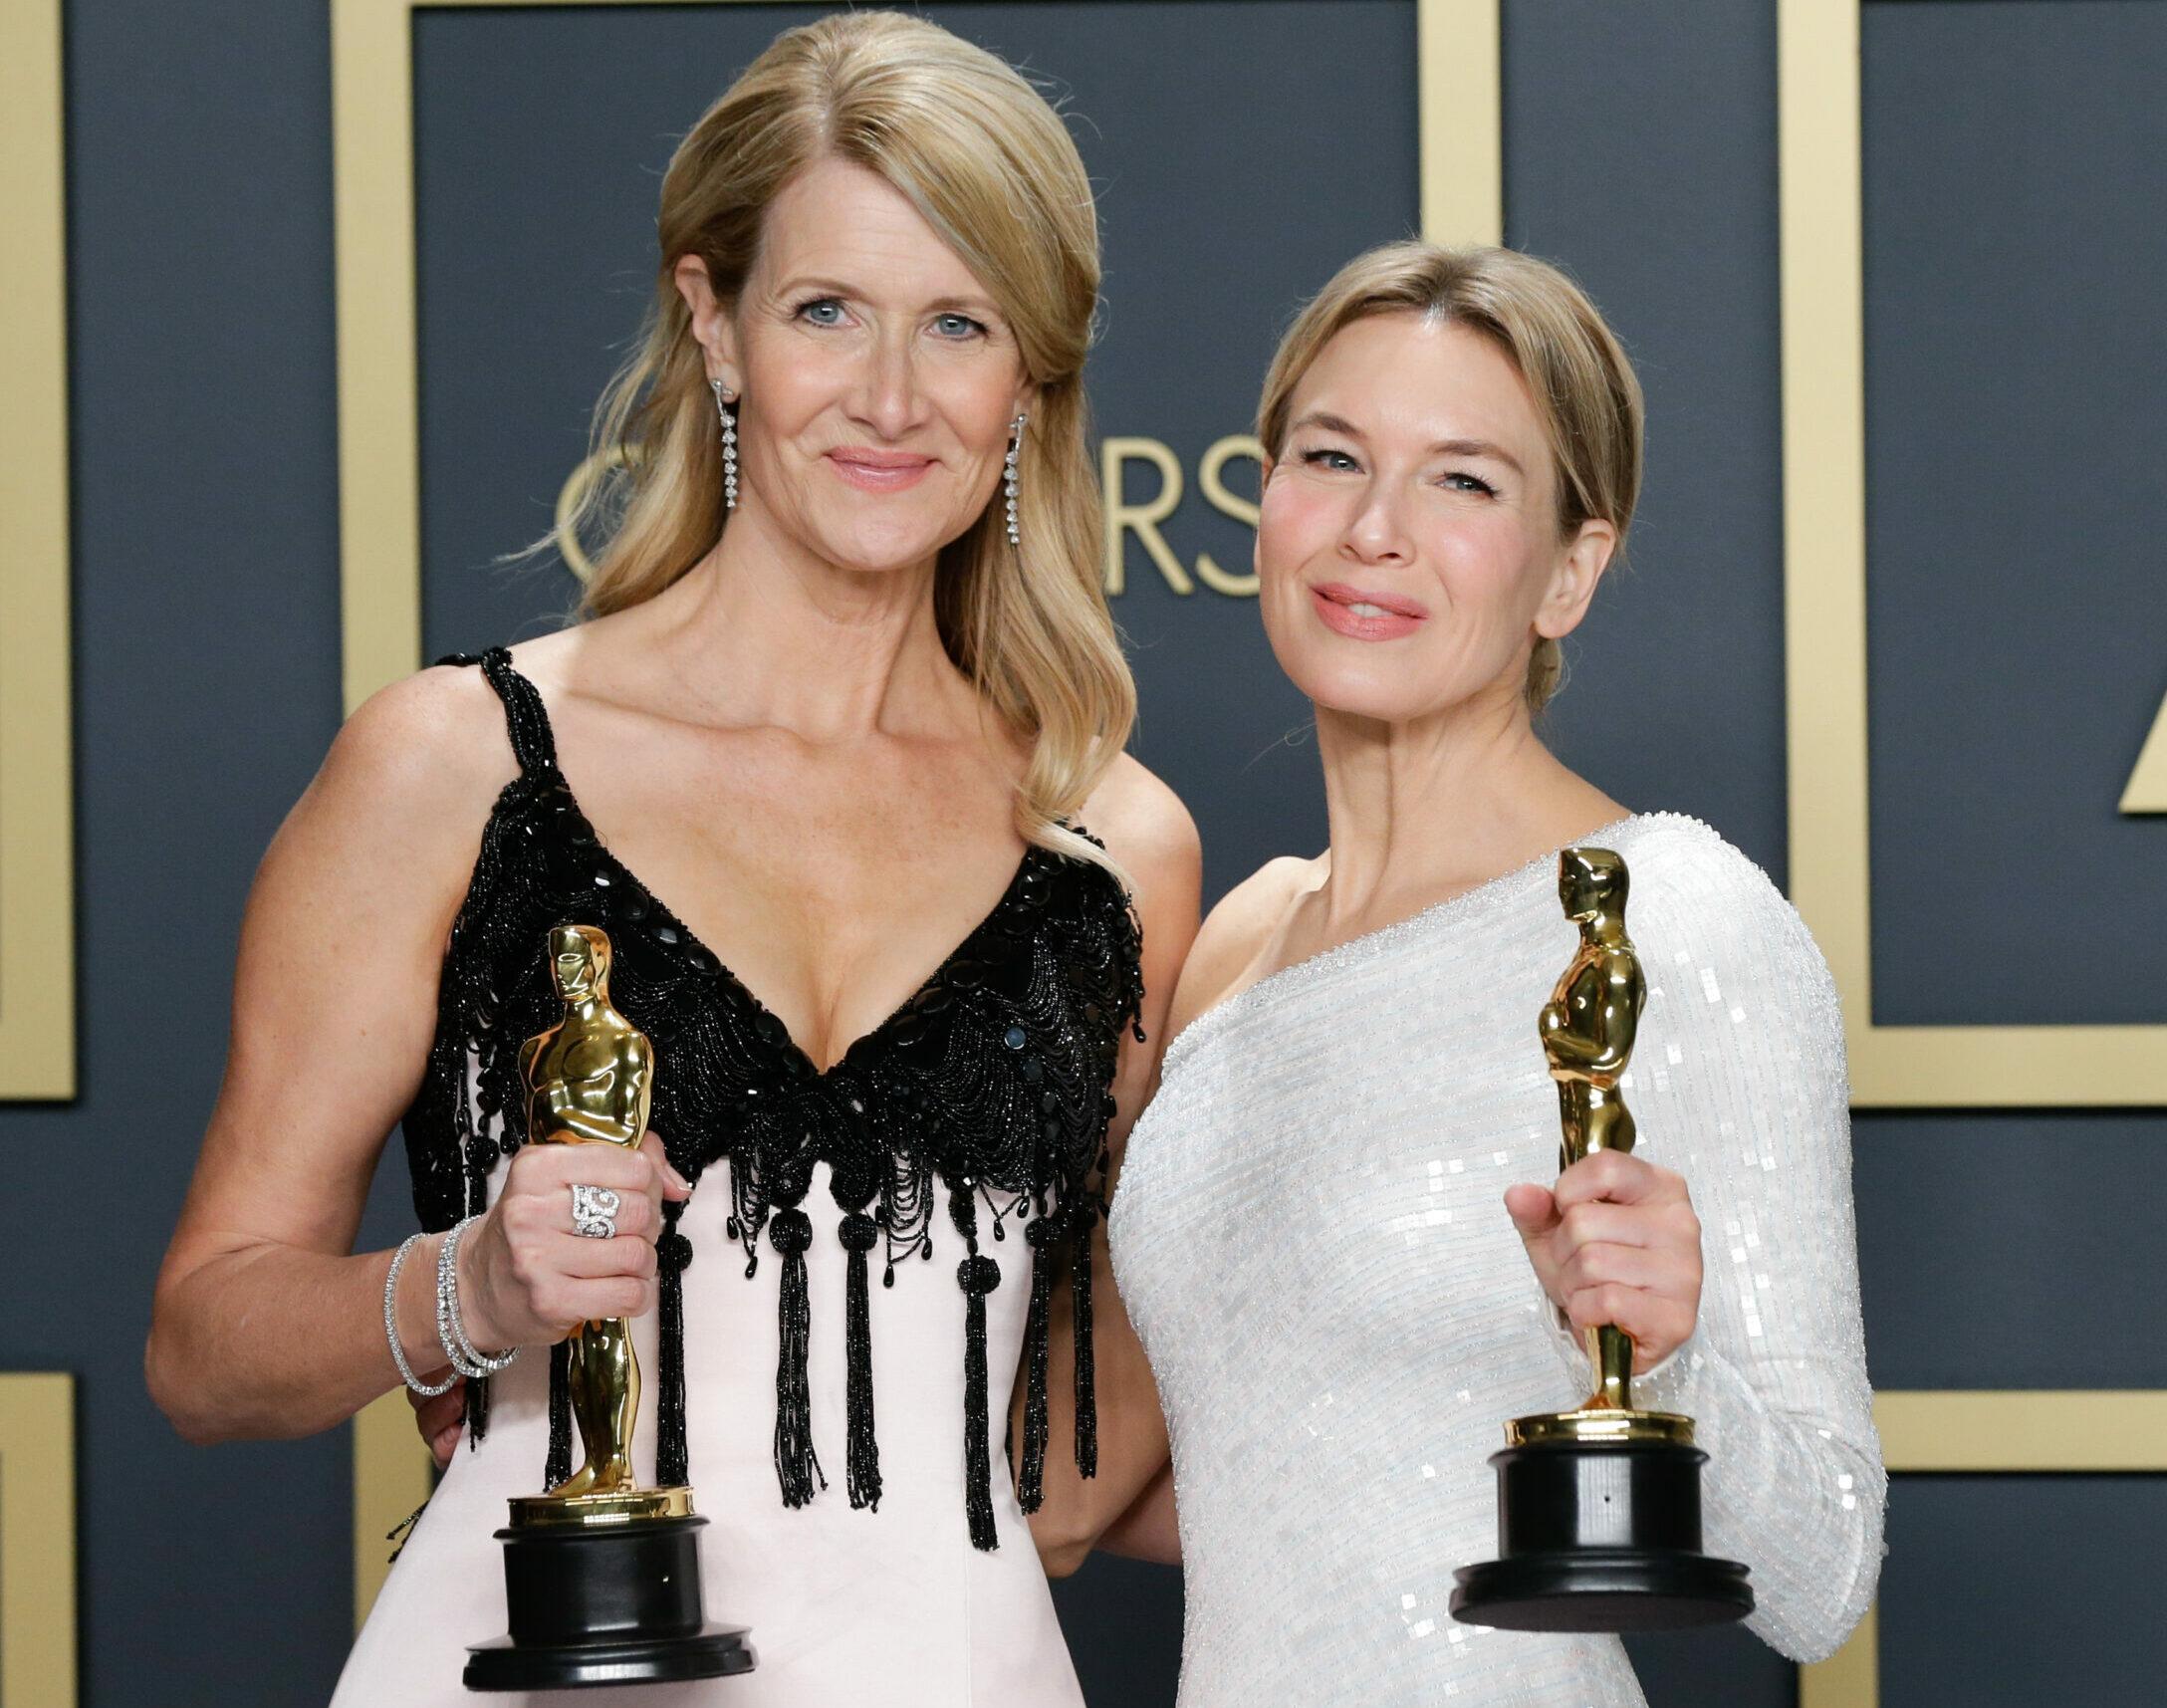 Laura Dern (L), winner of Best Actress in a Supporting Role for "Marriage Story," and Renée Zellweger, winner of Best Actress in a Leading Role for "Judy," appear backstage with their Oscar